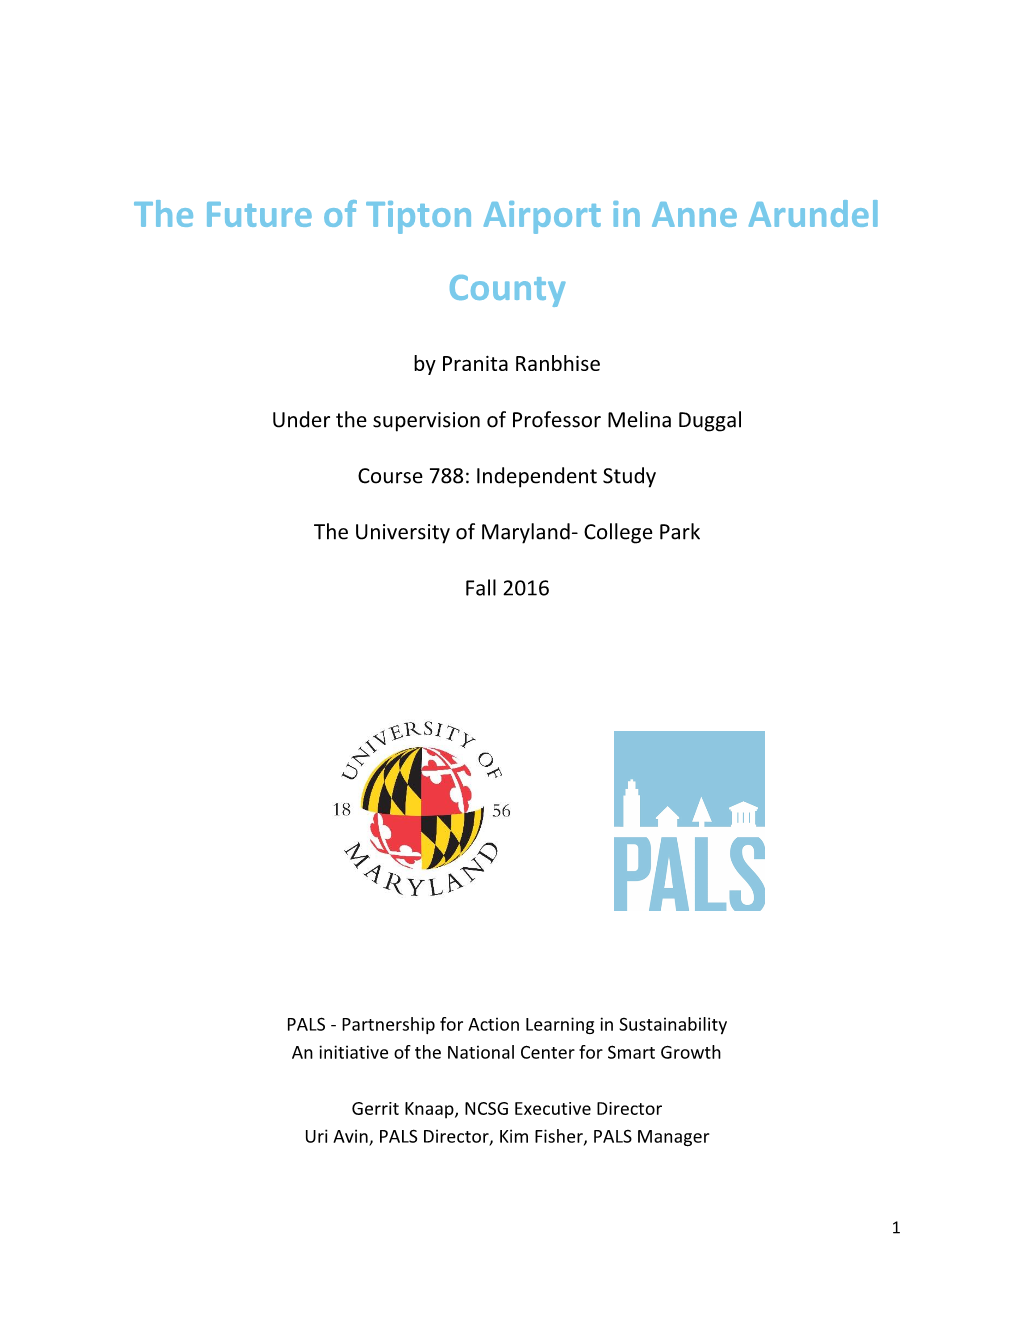 The Future of Tipton Airport in Anne Arundel County